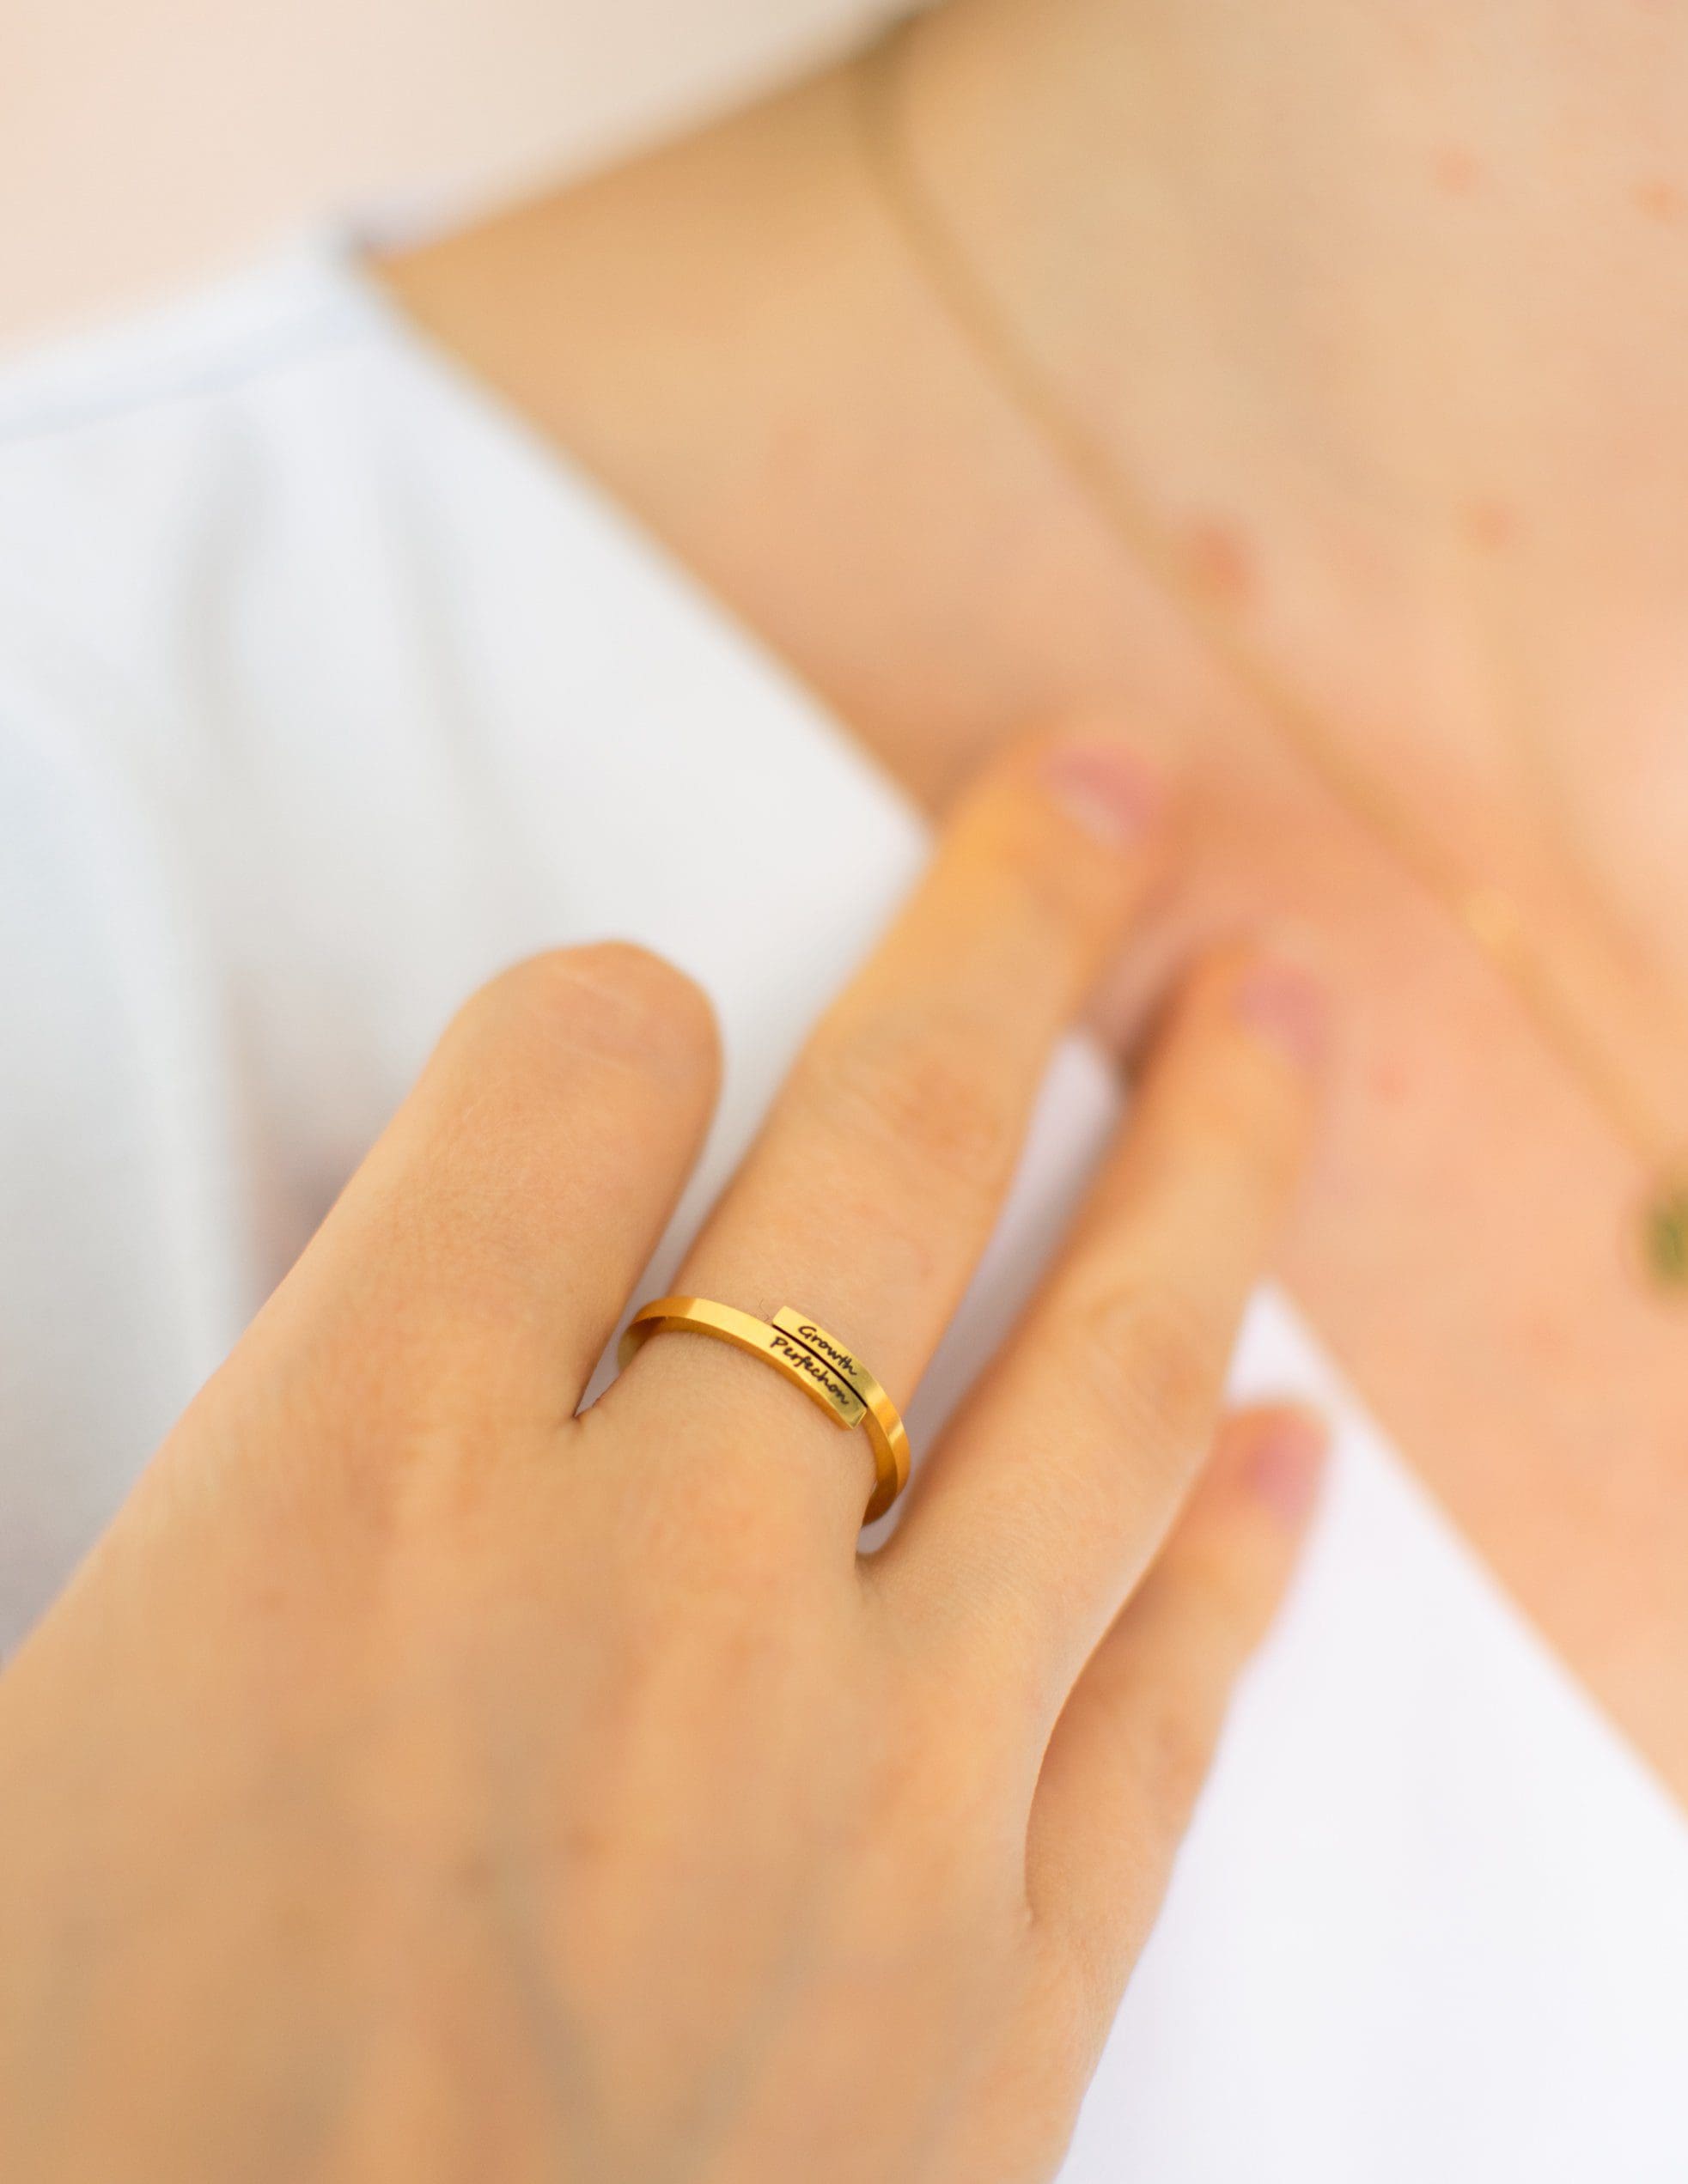 'Growth/Perfection' Ring